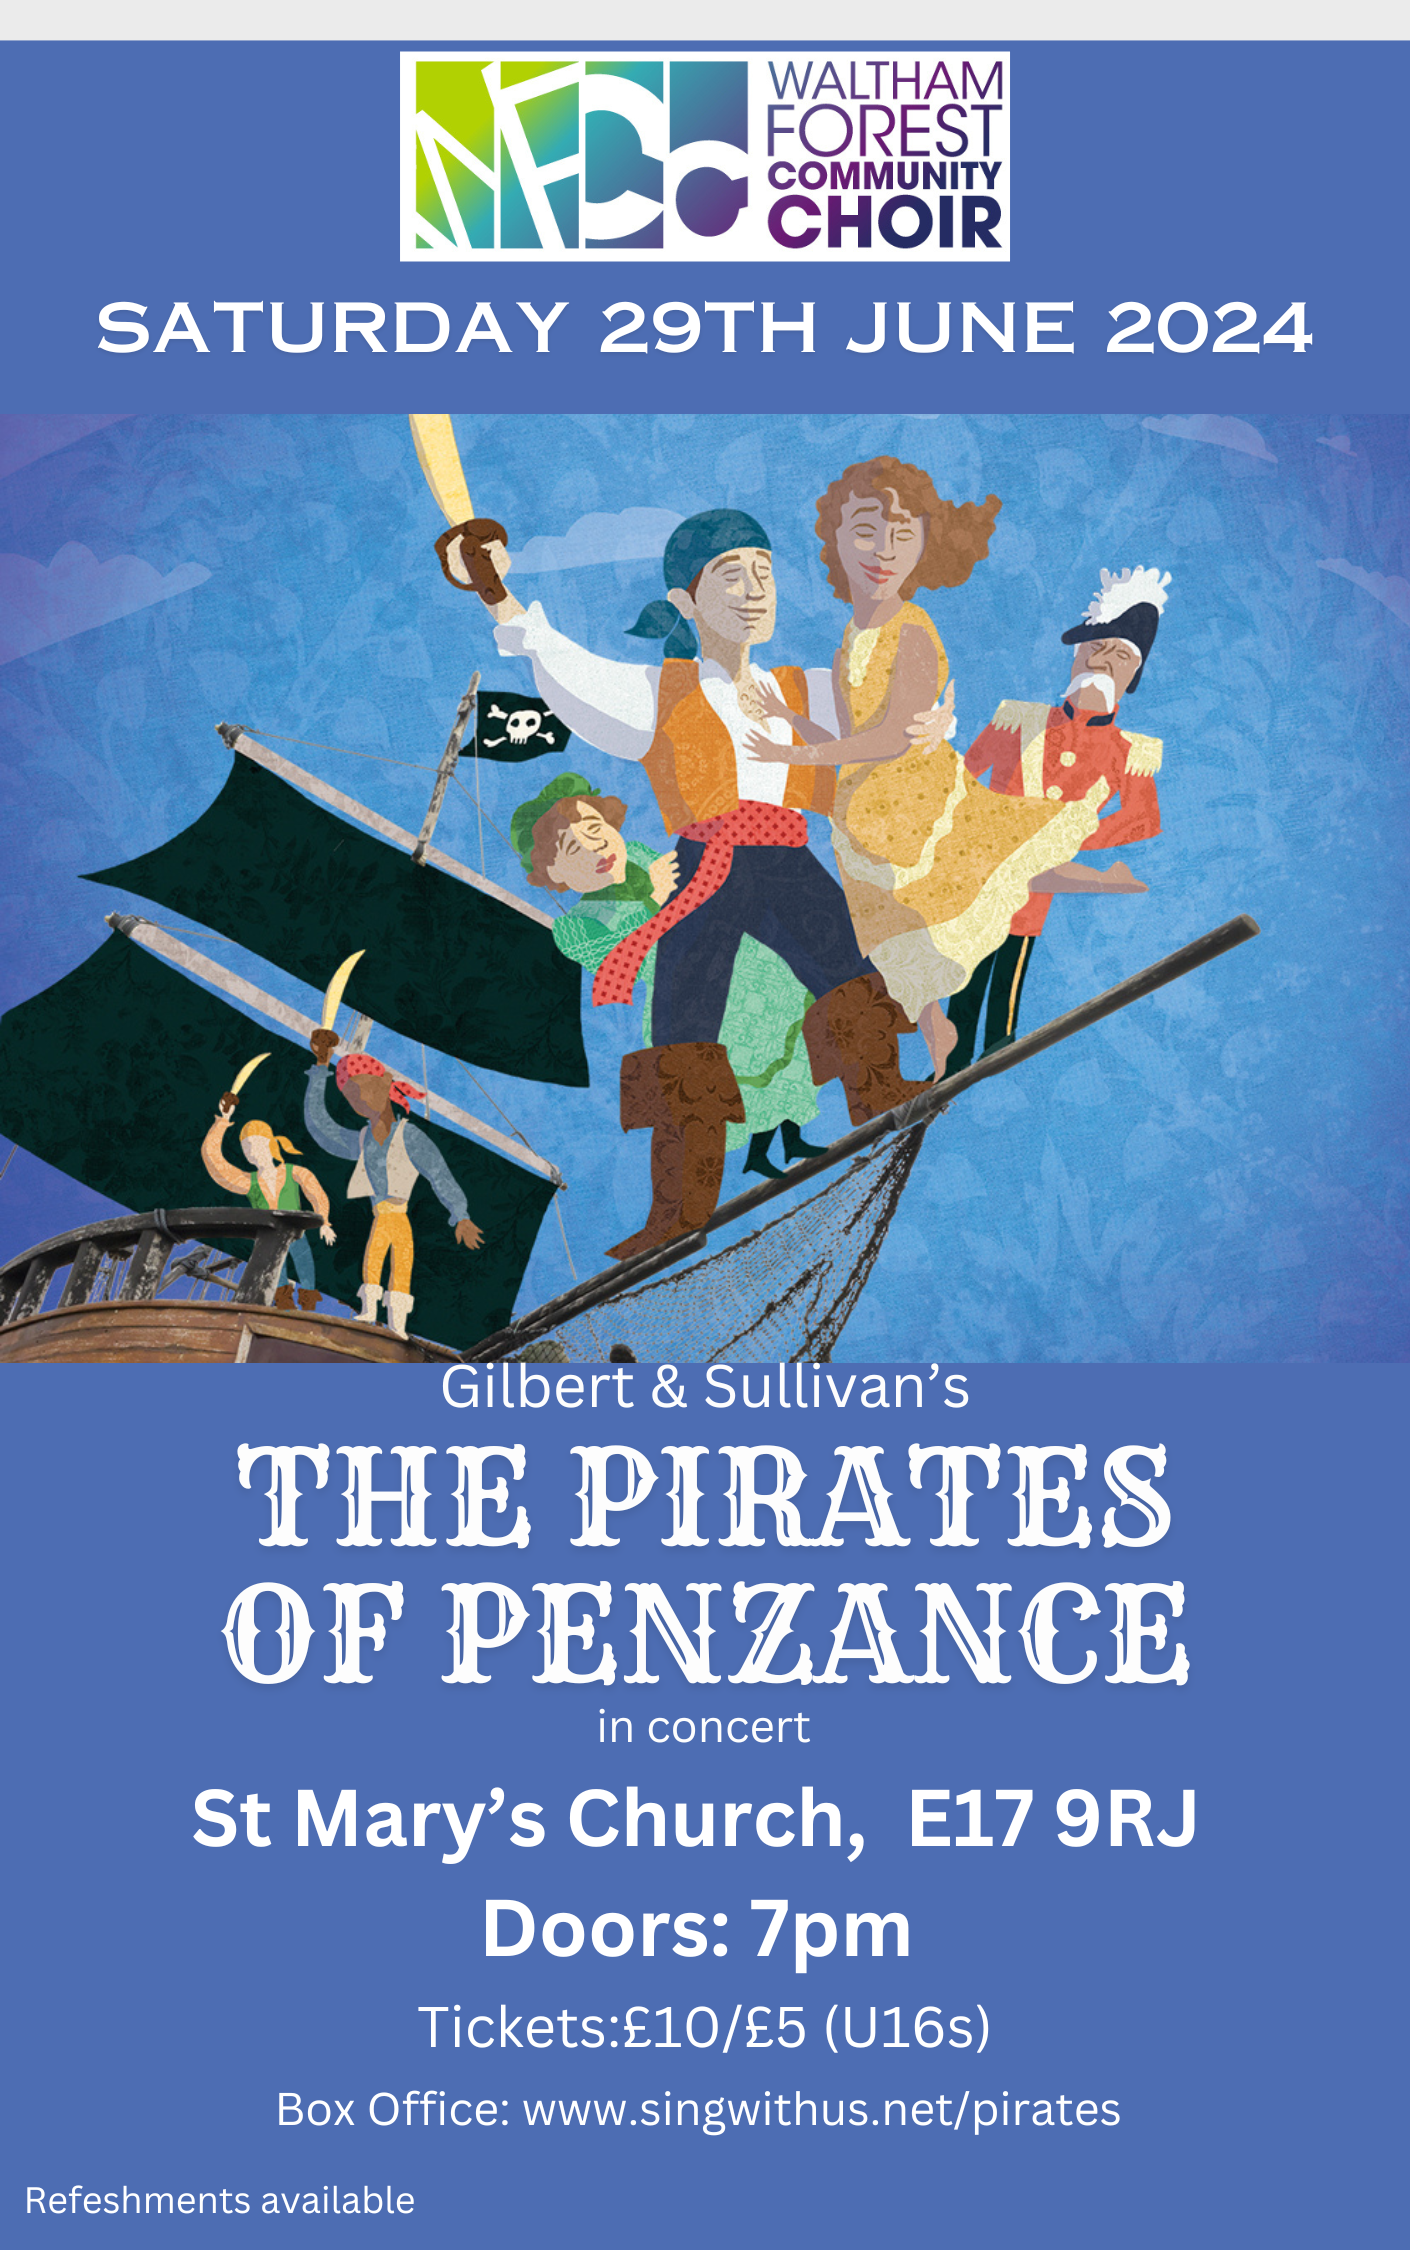 Pirates of Penzance Choir Concert - Tickets available on the door